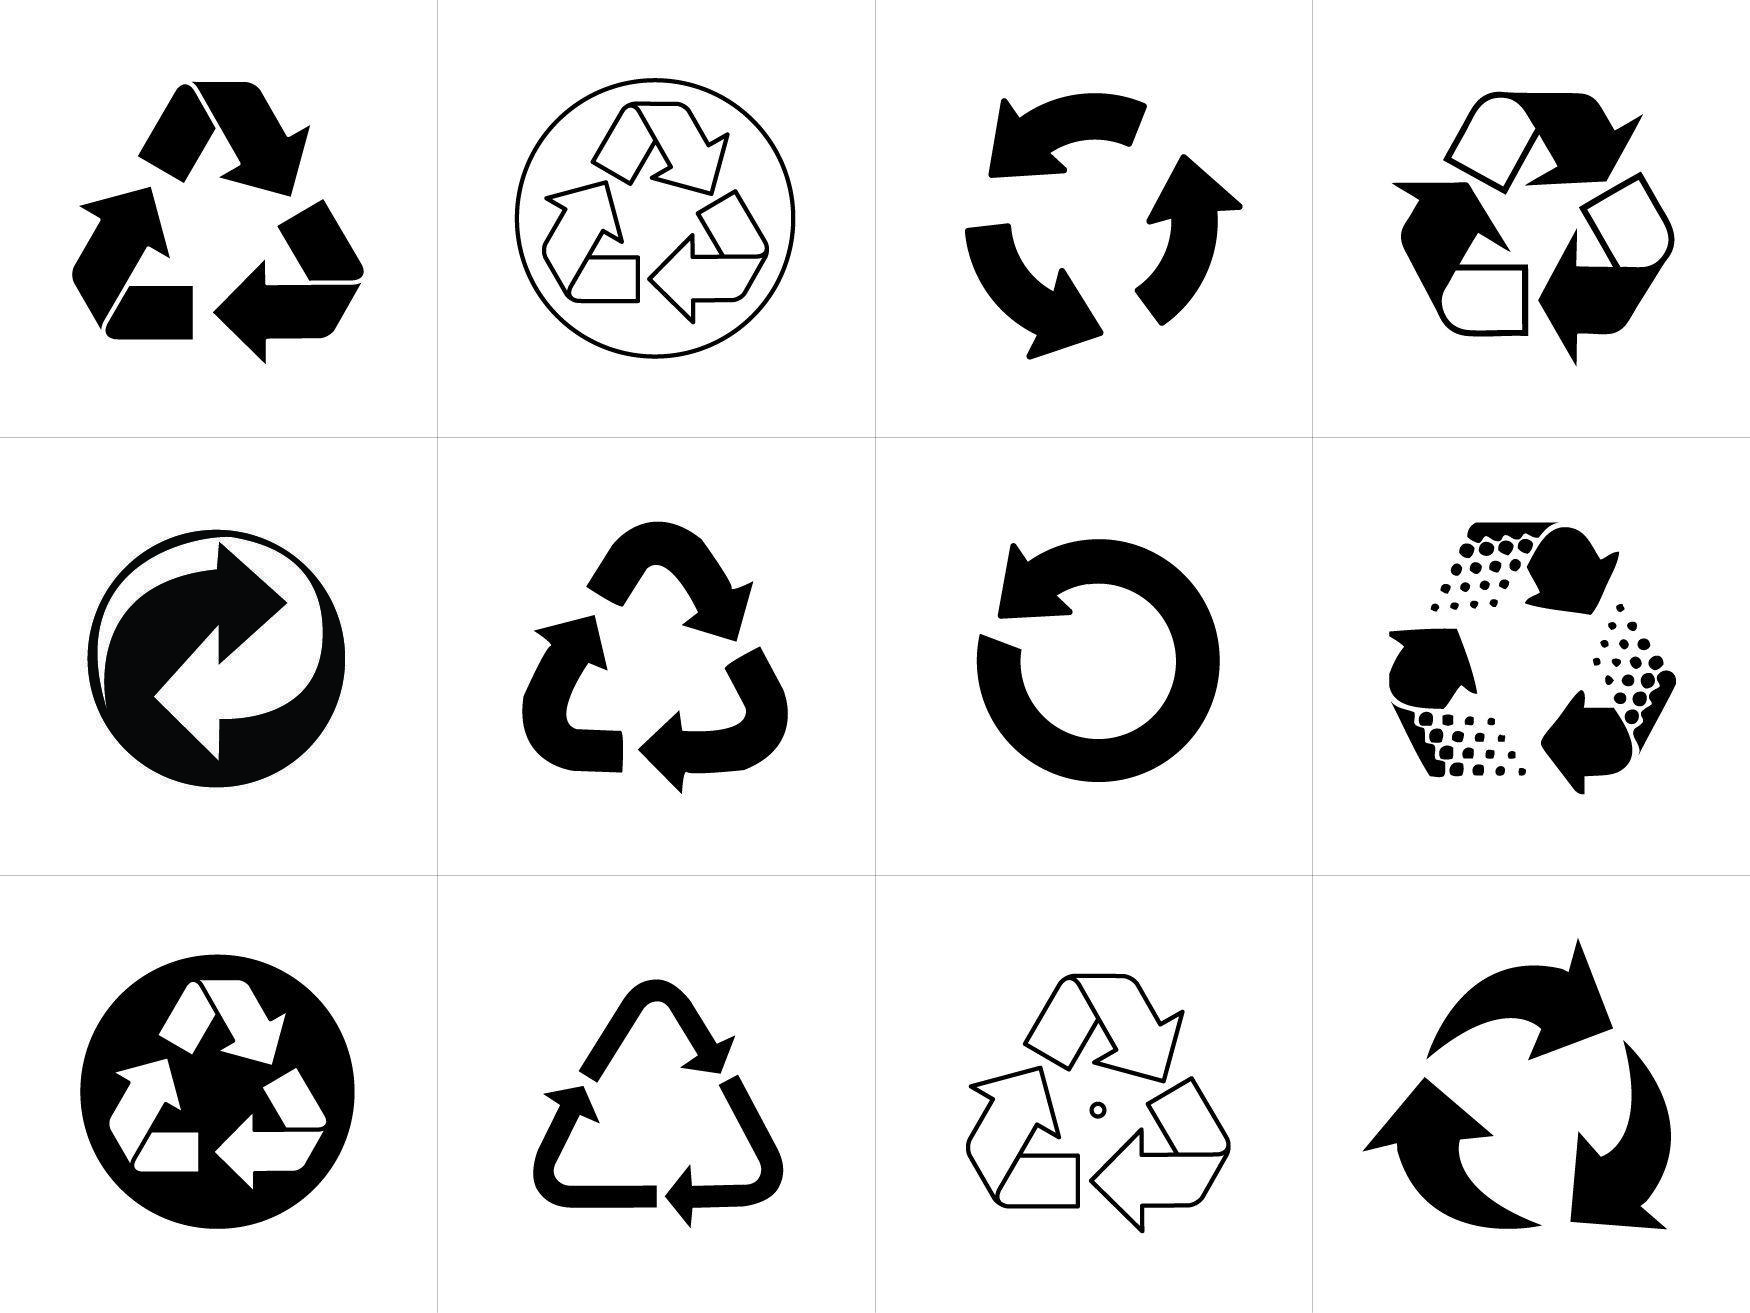 Black Recycle Logo - Recycling Symbol Vectors for Download | NEFF | Pinterest | Recycle ...